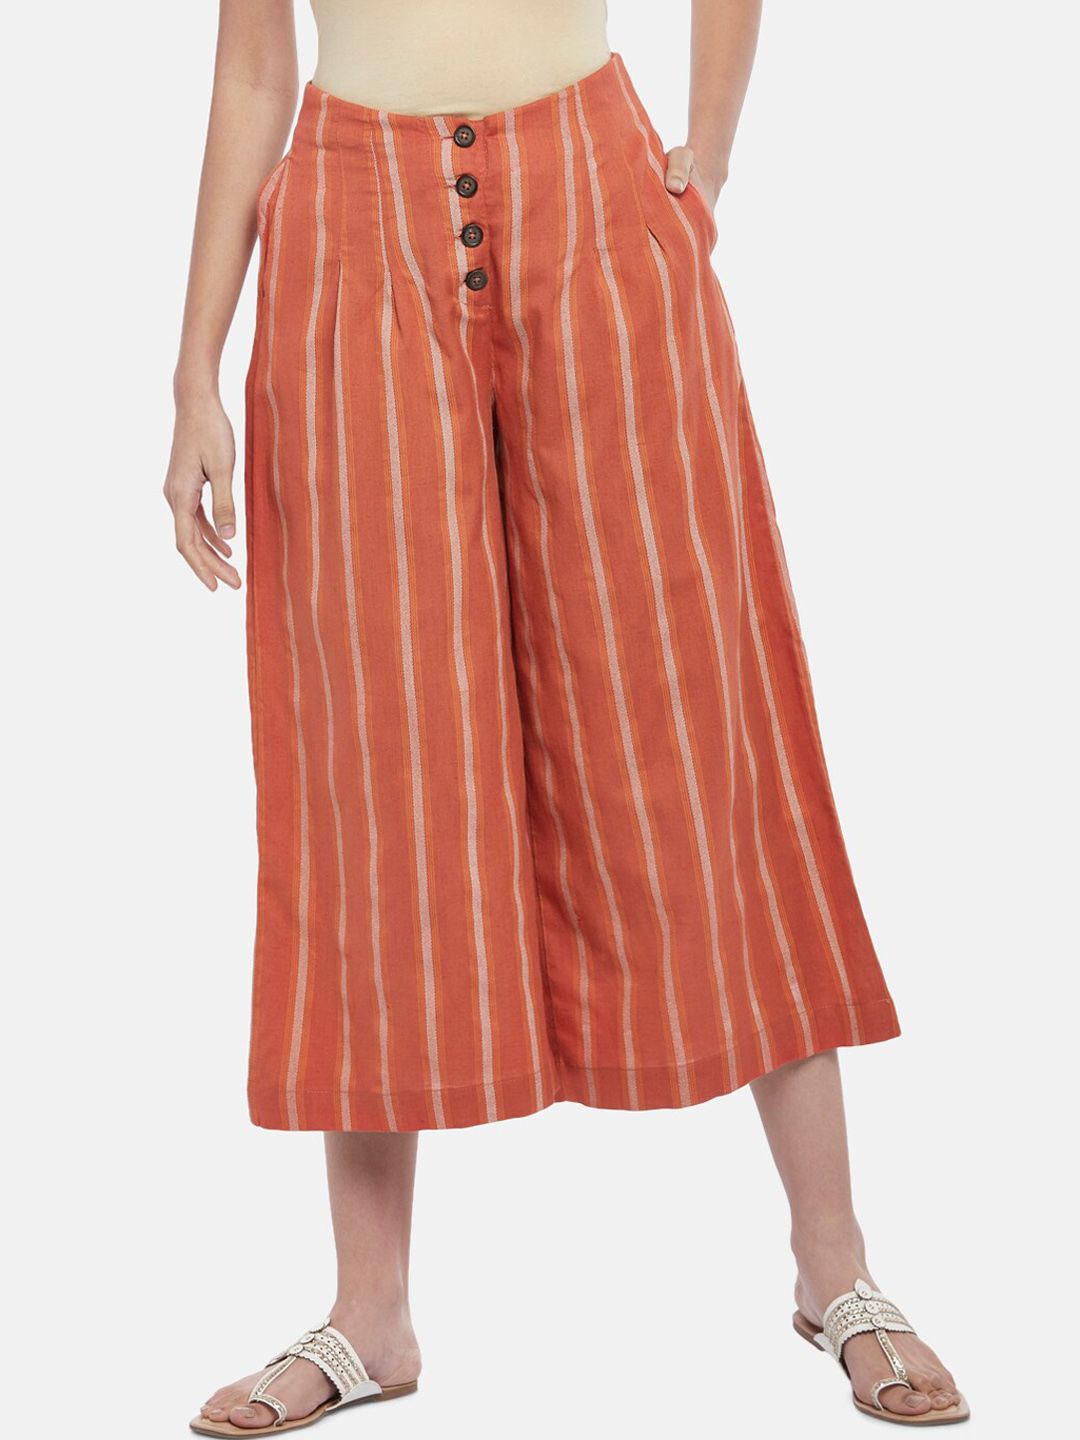 AKKRITI BY PANTALOONS Women Rust Striped Culottes Trousers Price in India